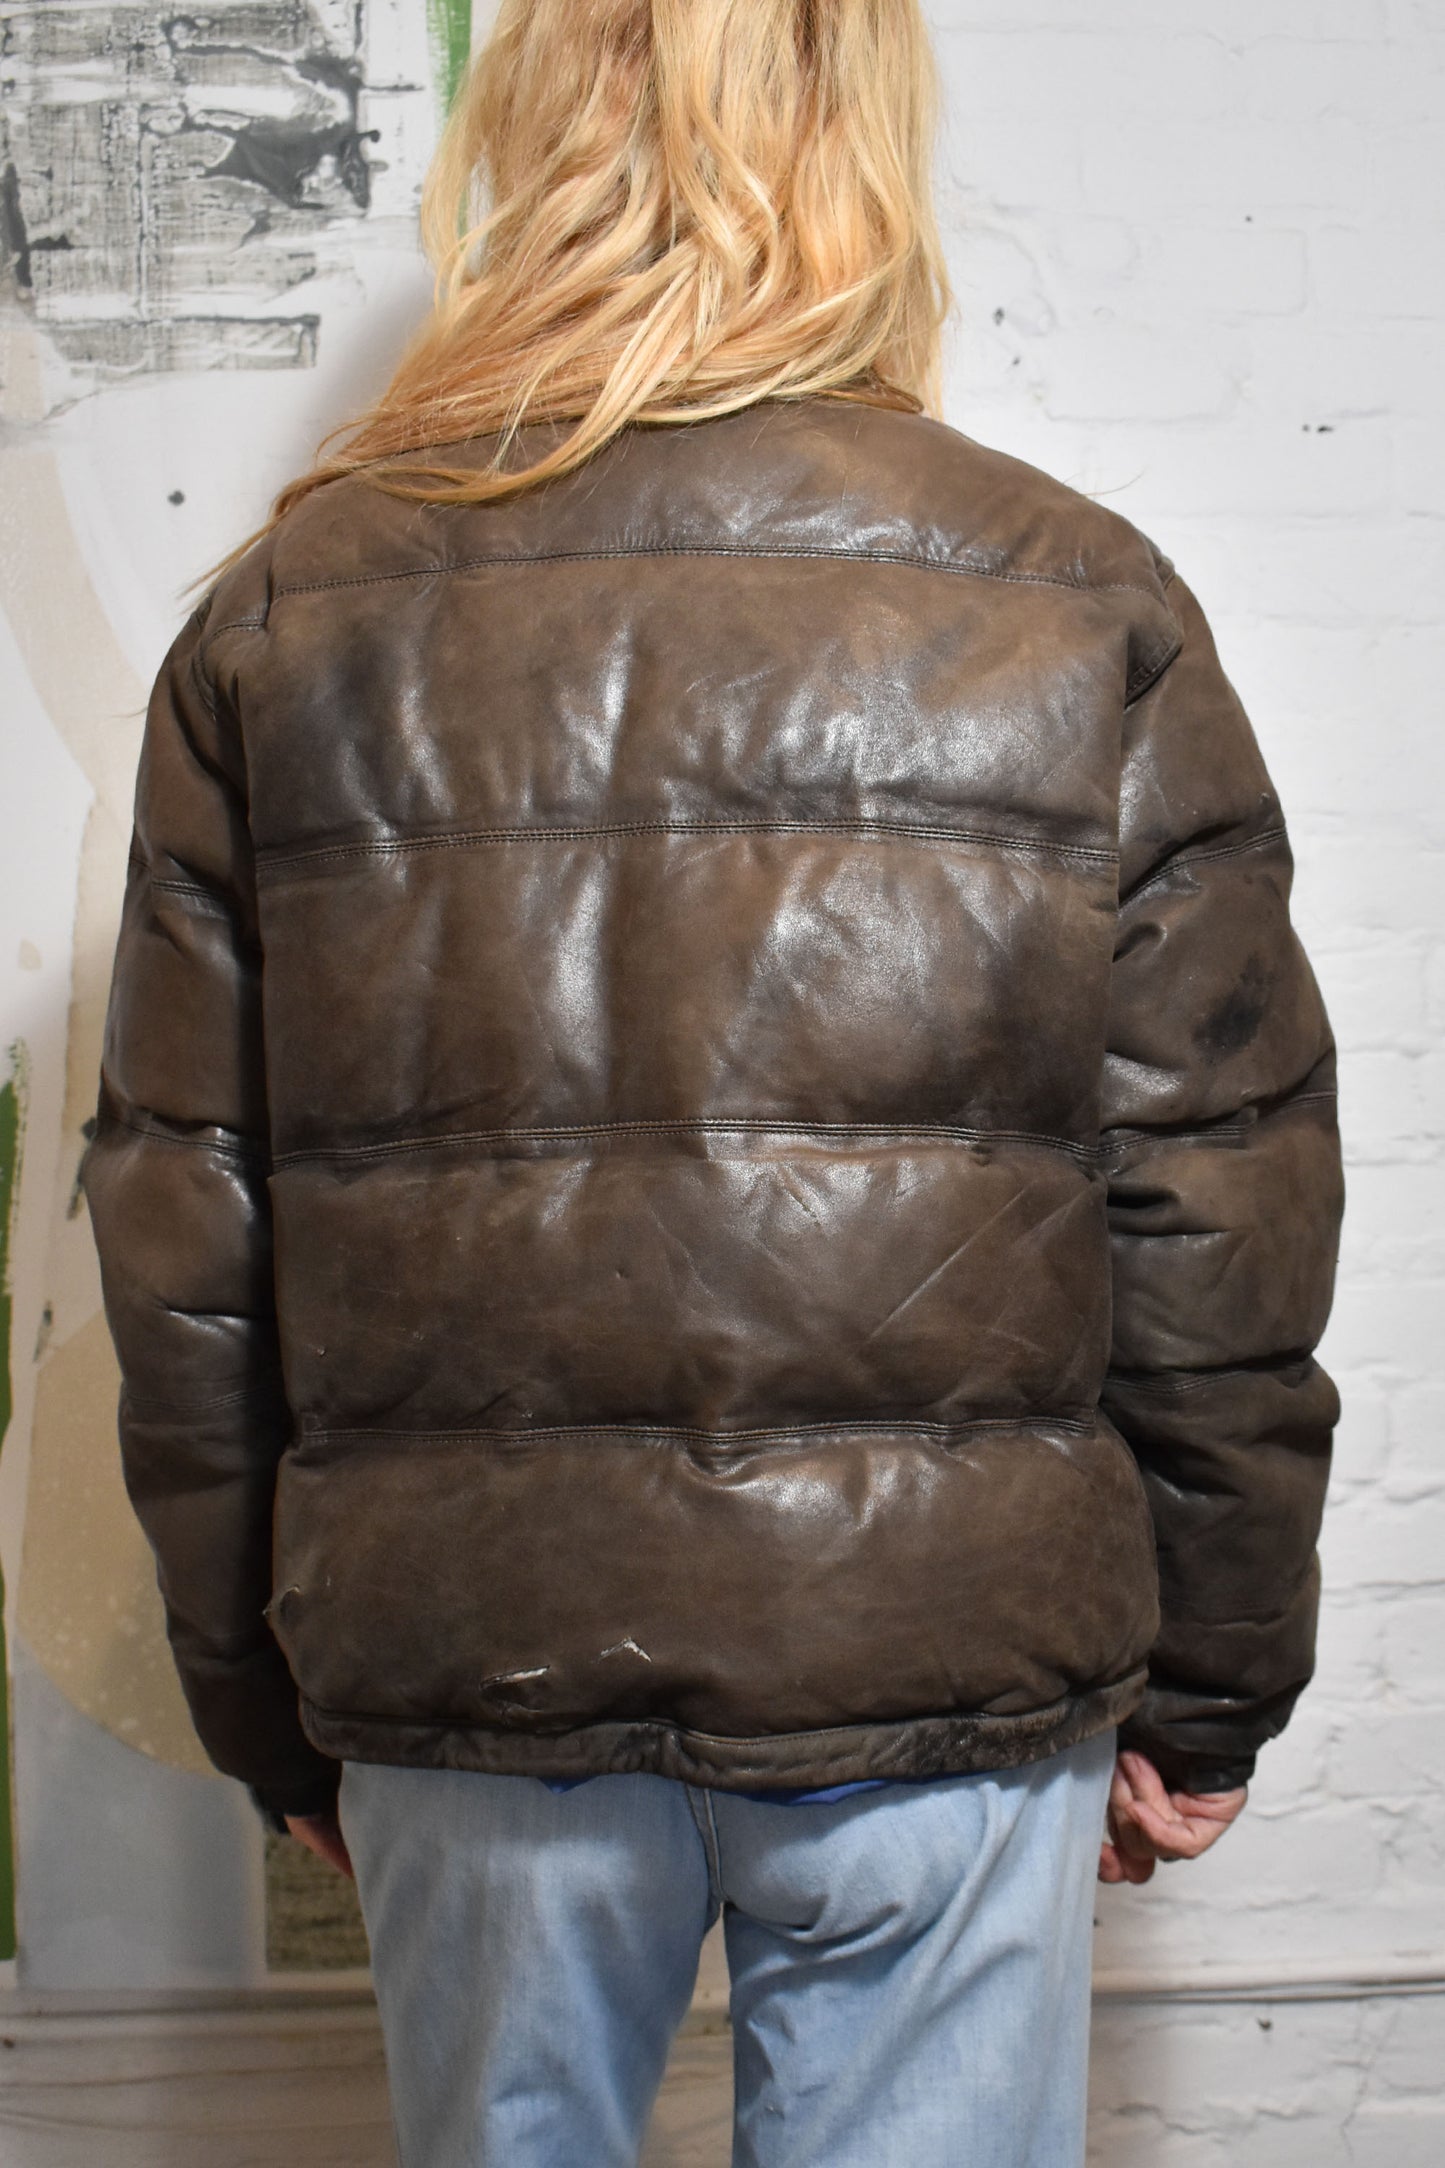 Vintage 1990s "Polo by Ralph Lauren" Leather Puffy Jacket